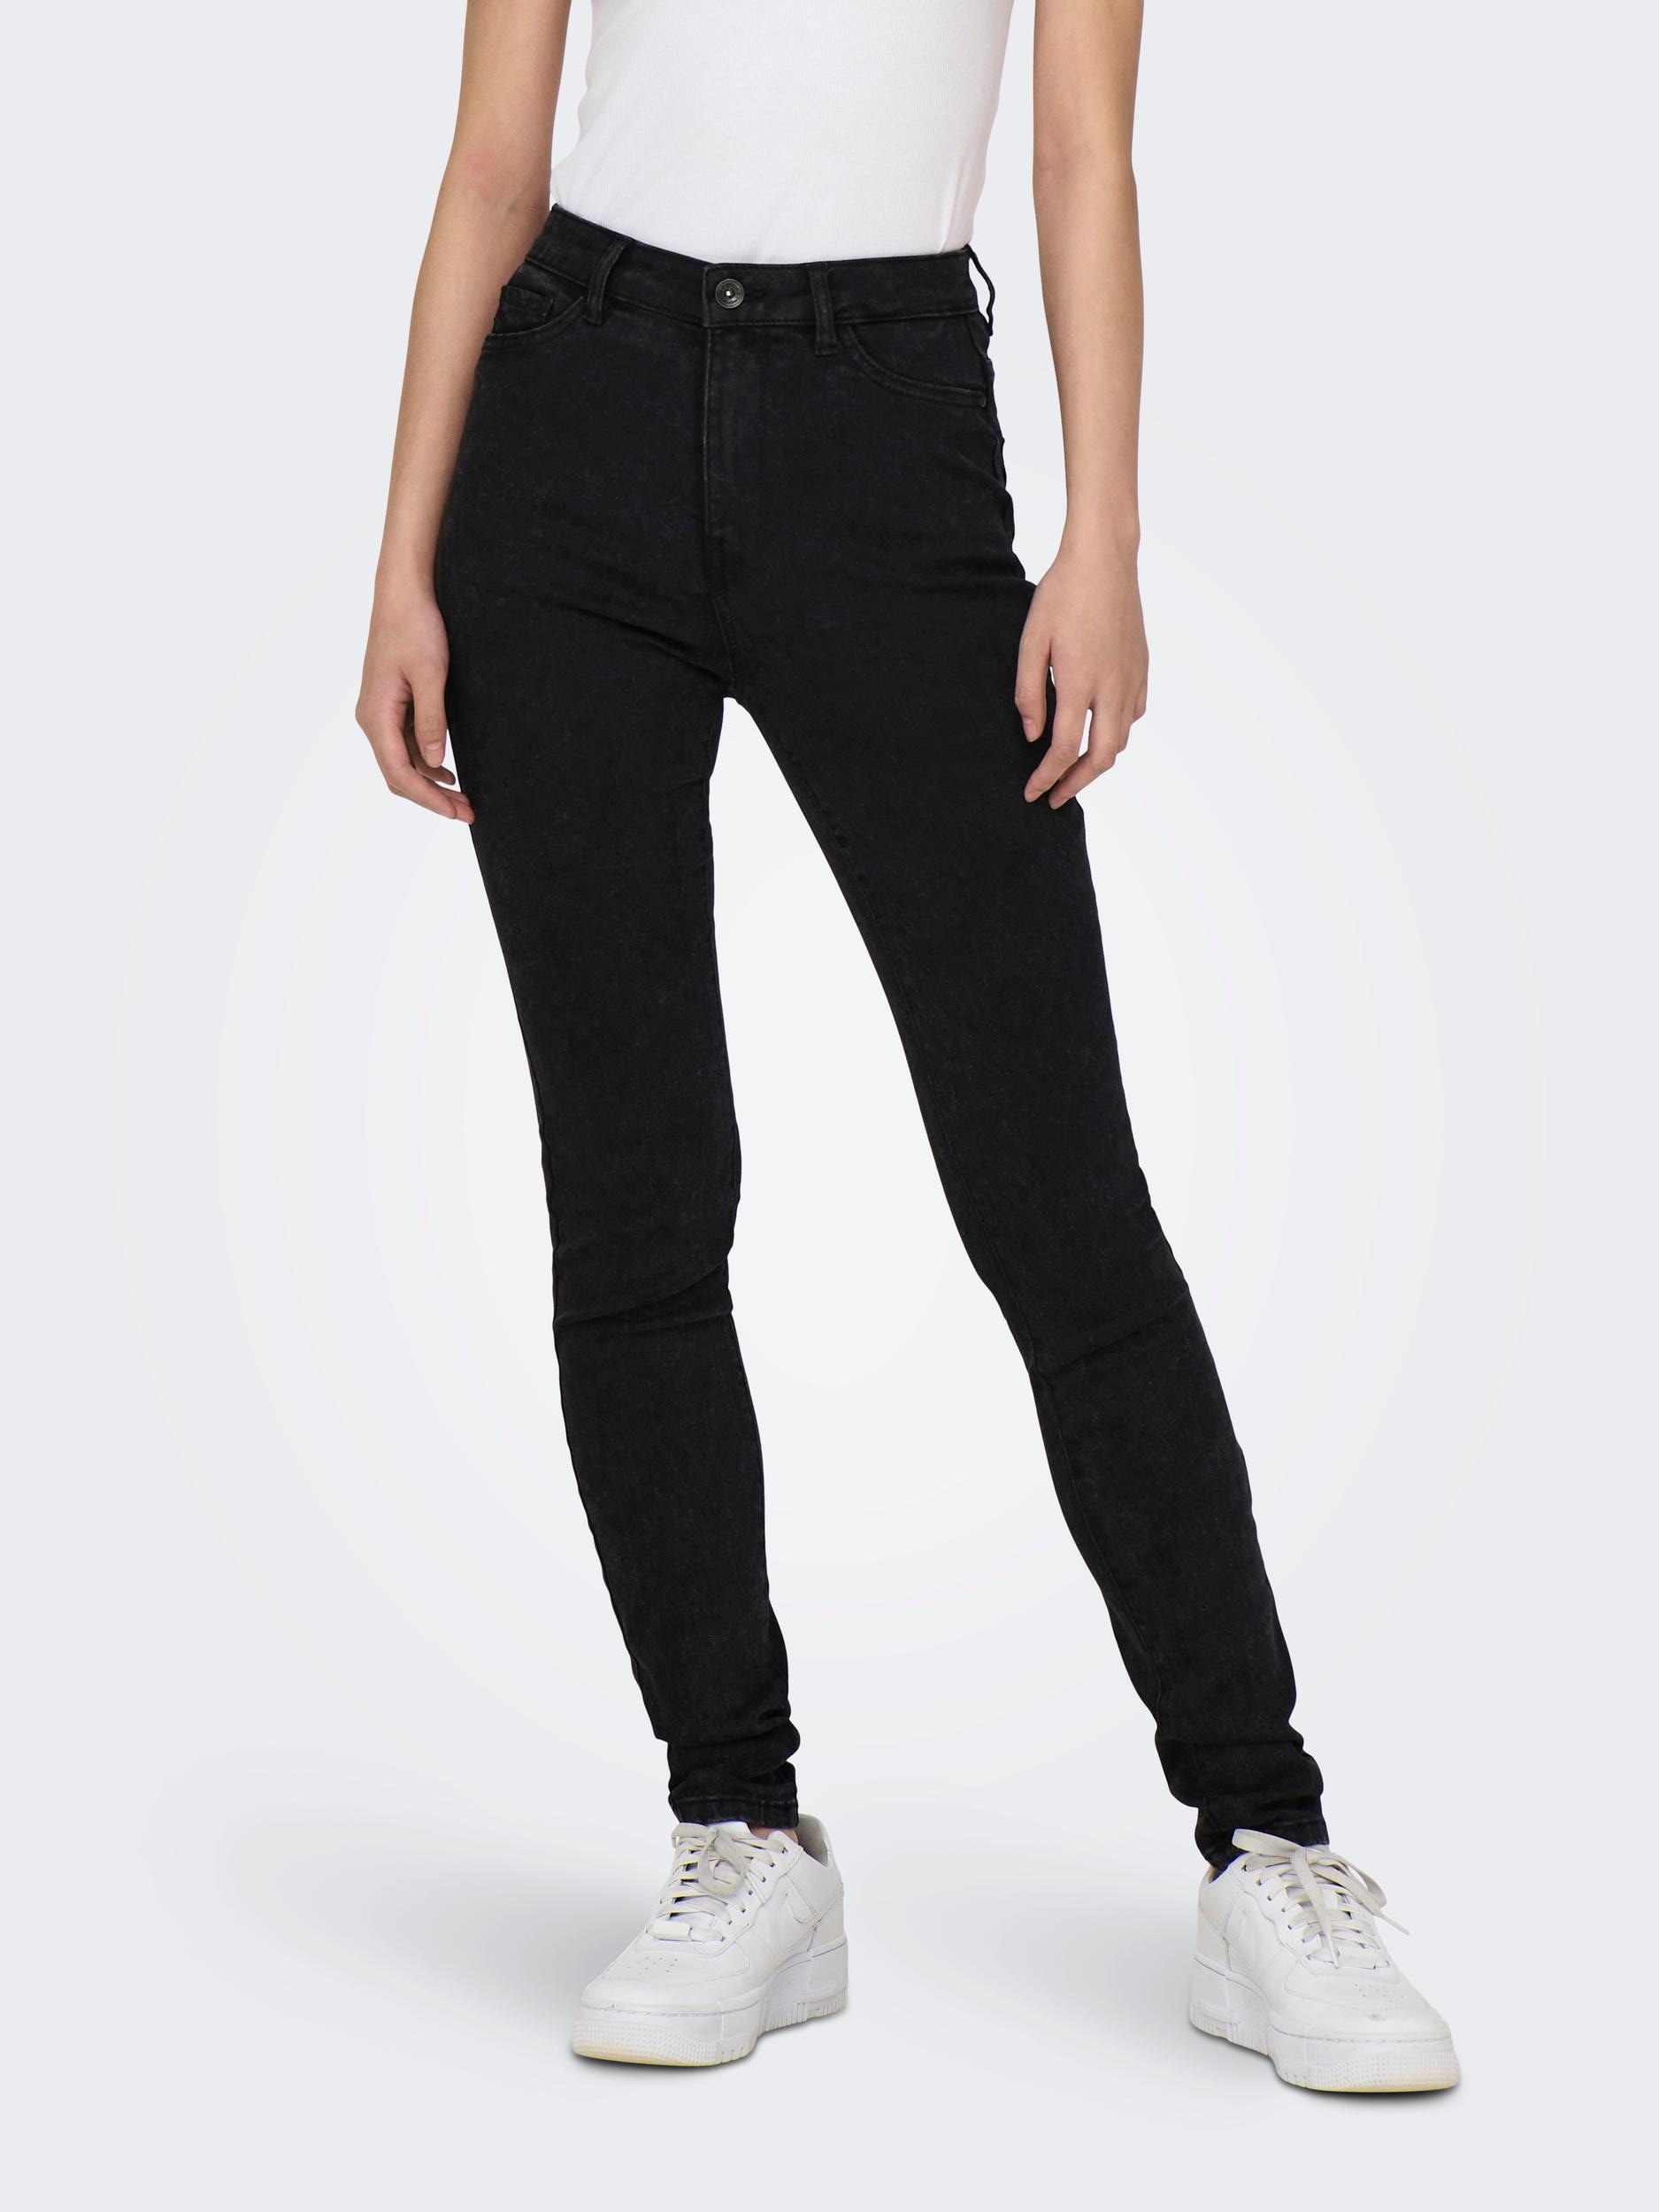 DNM HW »ONLROSE kaufen OTTO NOOS« SKINNY GUA256 bei ONLY Skinny-fit-Jeans